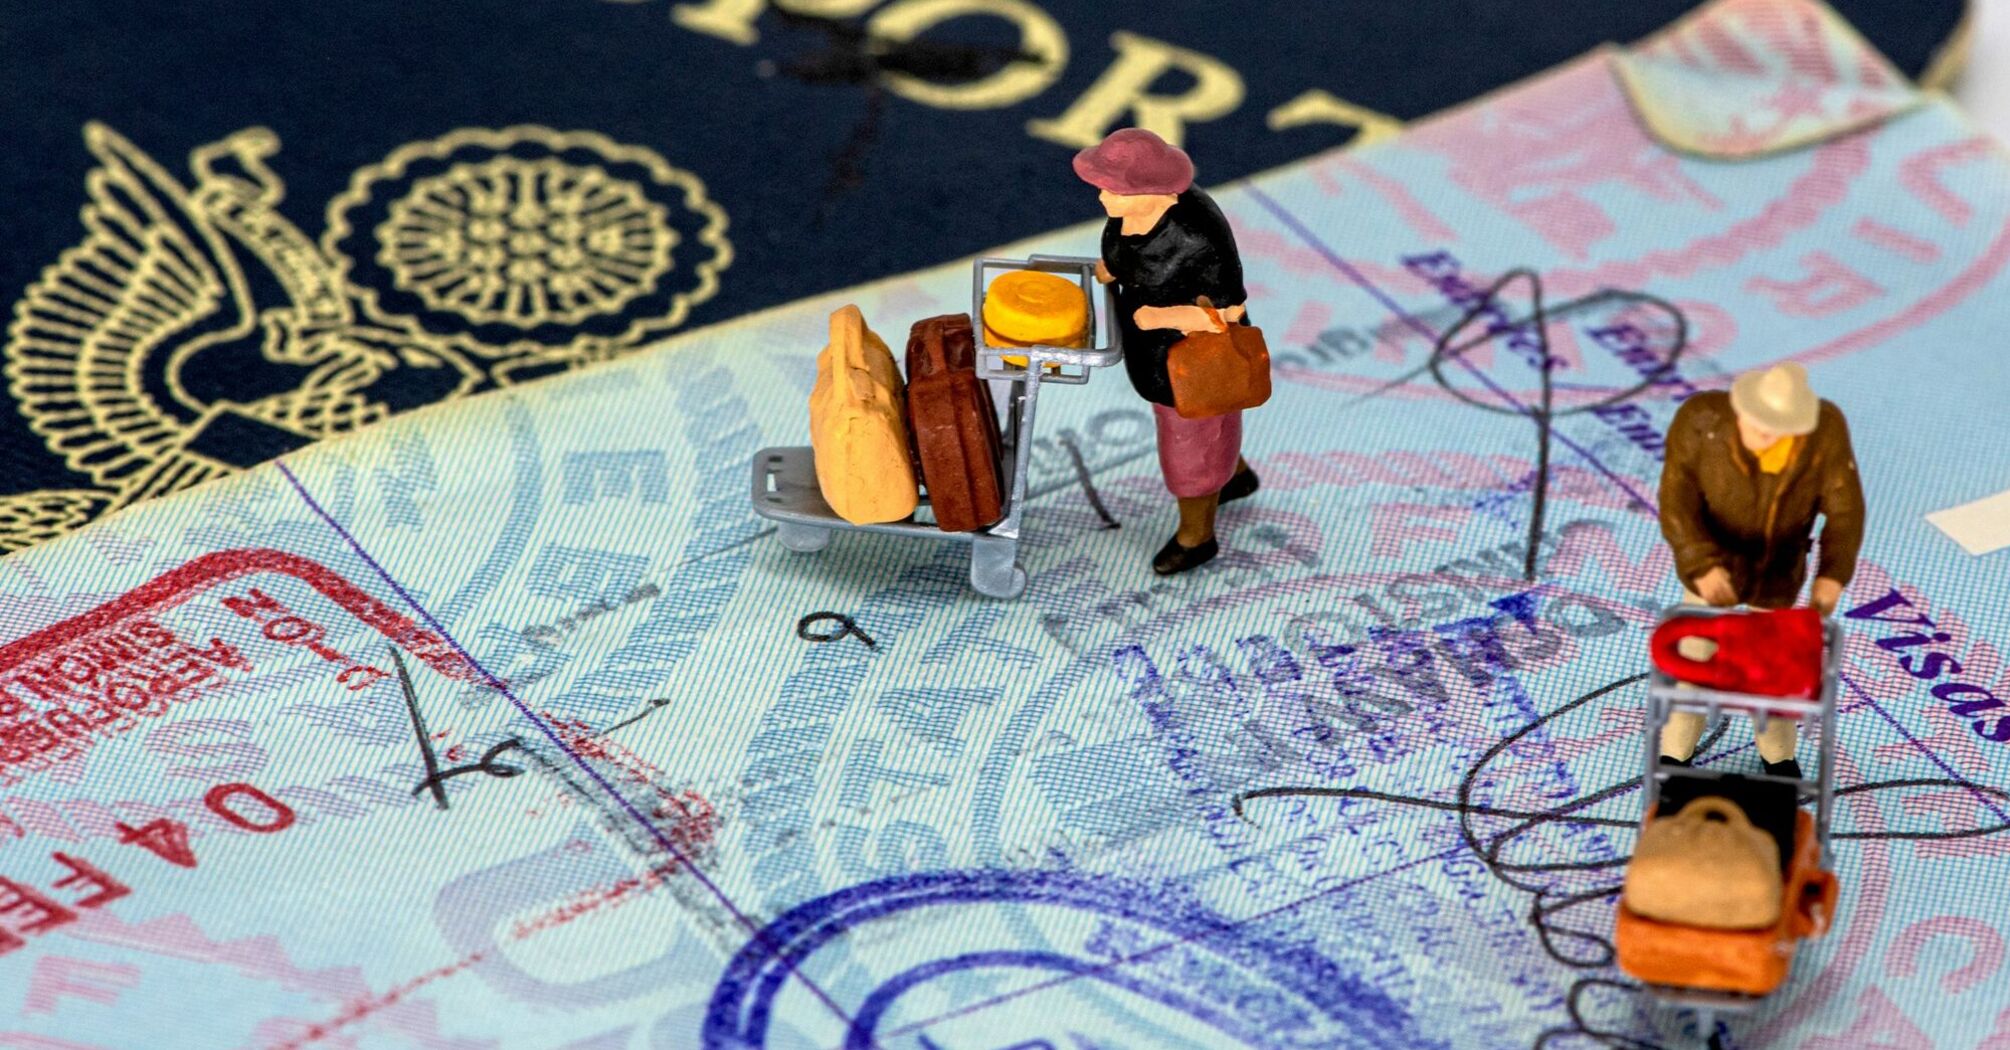 Miniature figures on a passport with travel stamps and visas, depicting travelers with luggage